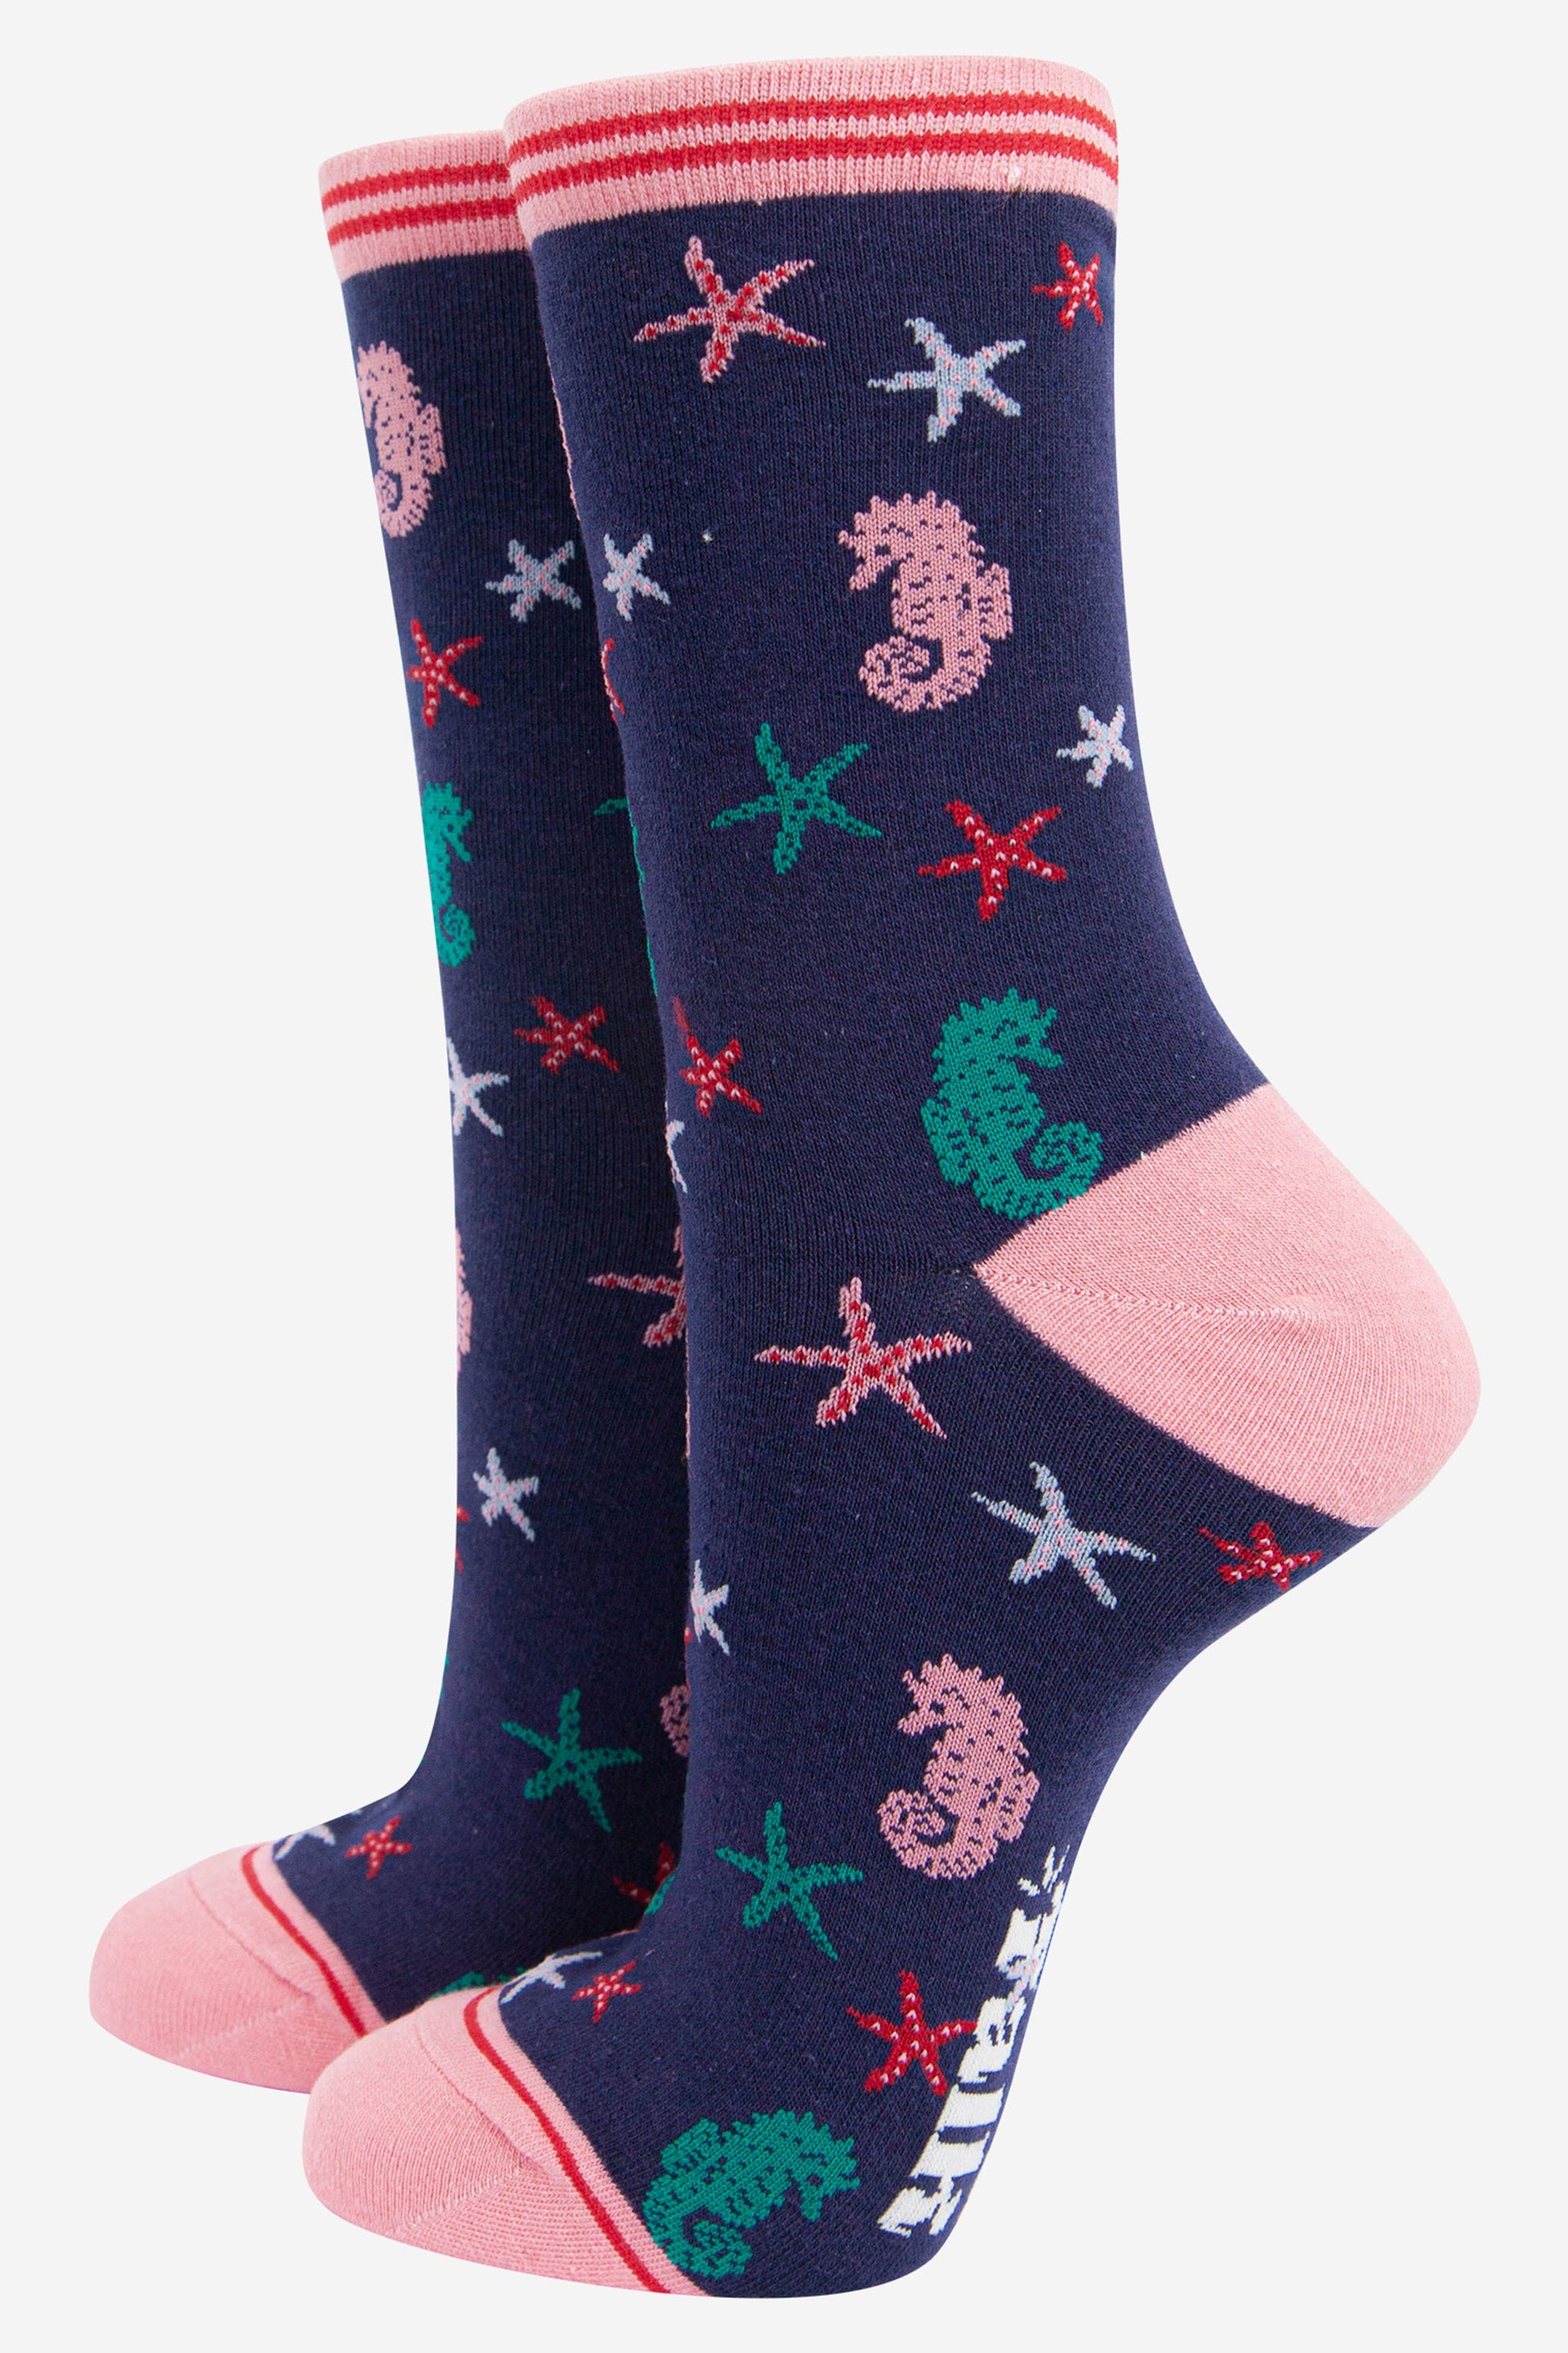 navy blue and pink ankle socks with an all over pattern of star fish and seahorses